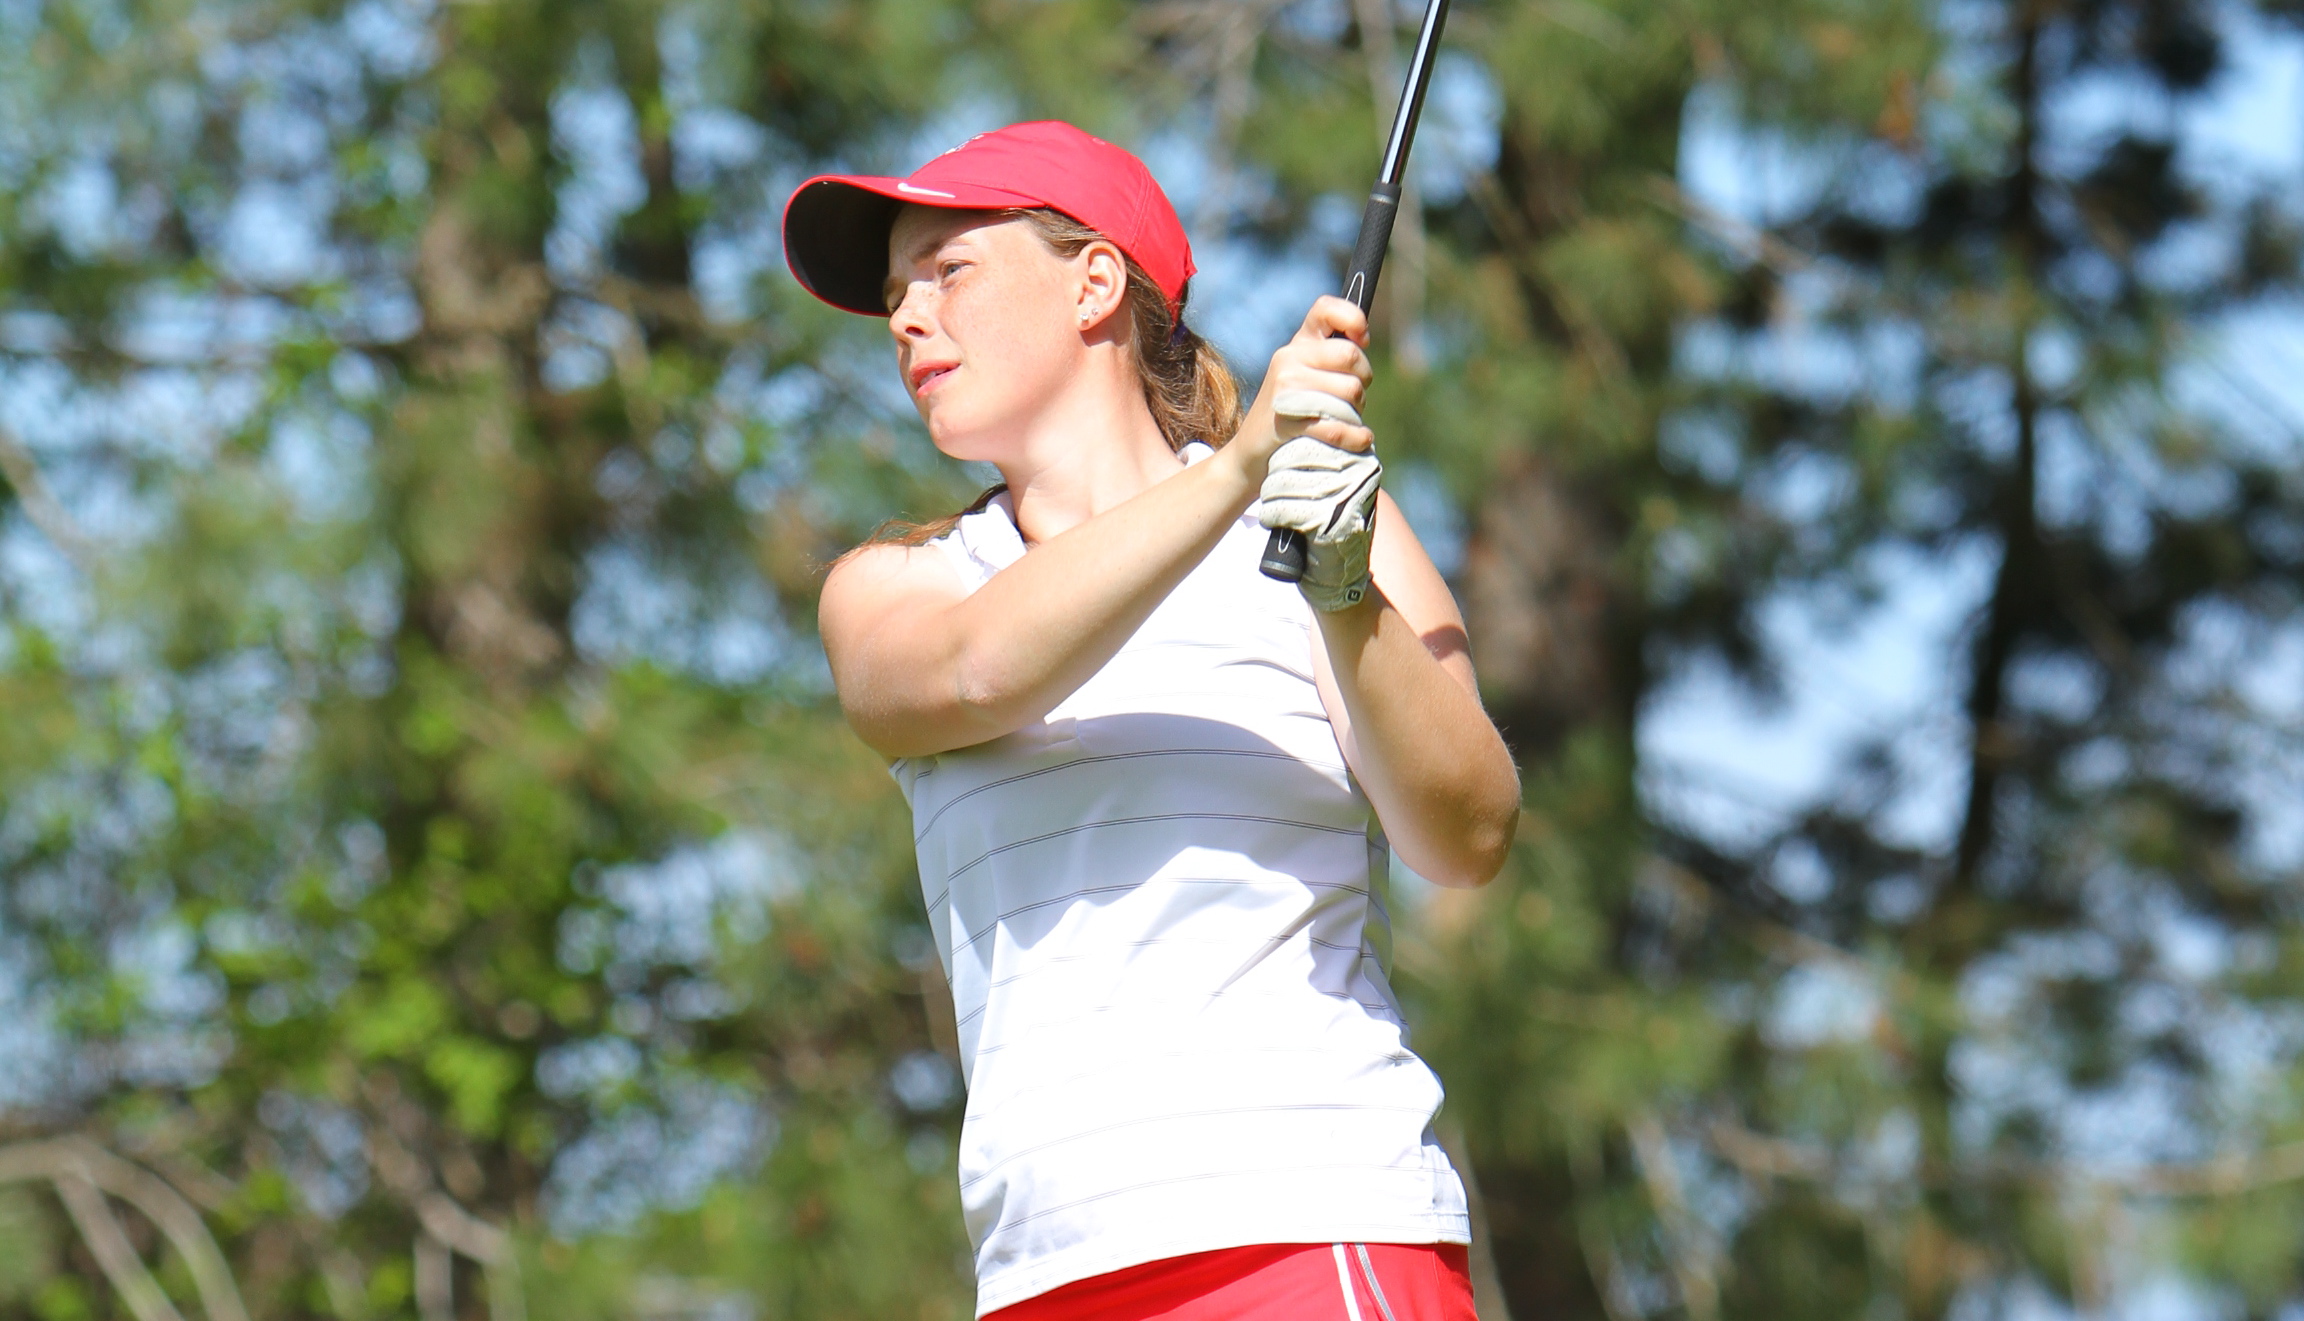 NNU's Samantha Miller is the individual leader after the first day of competition.